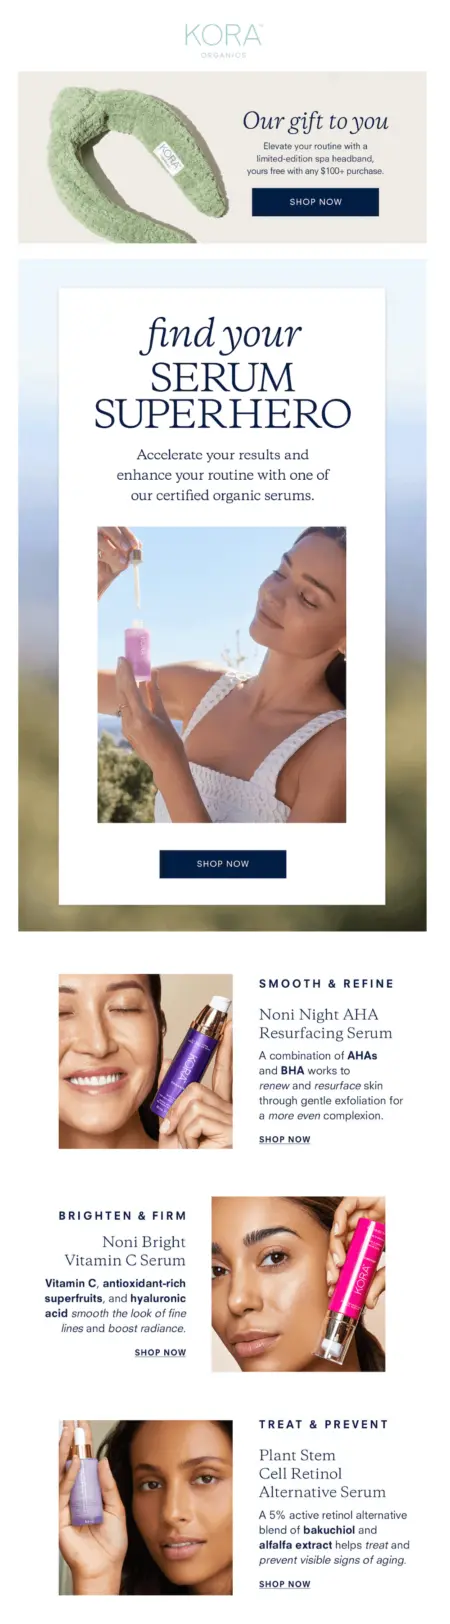 Image shows a personalized cross-sell email from KORA Organics